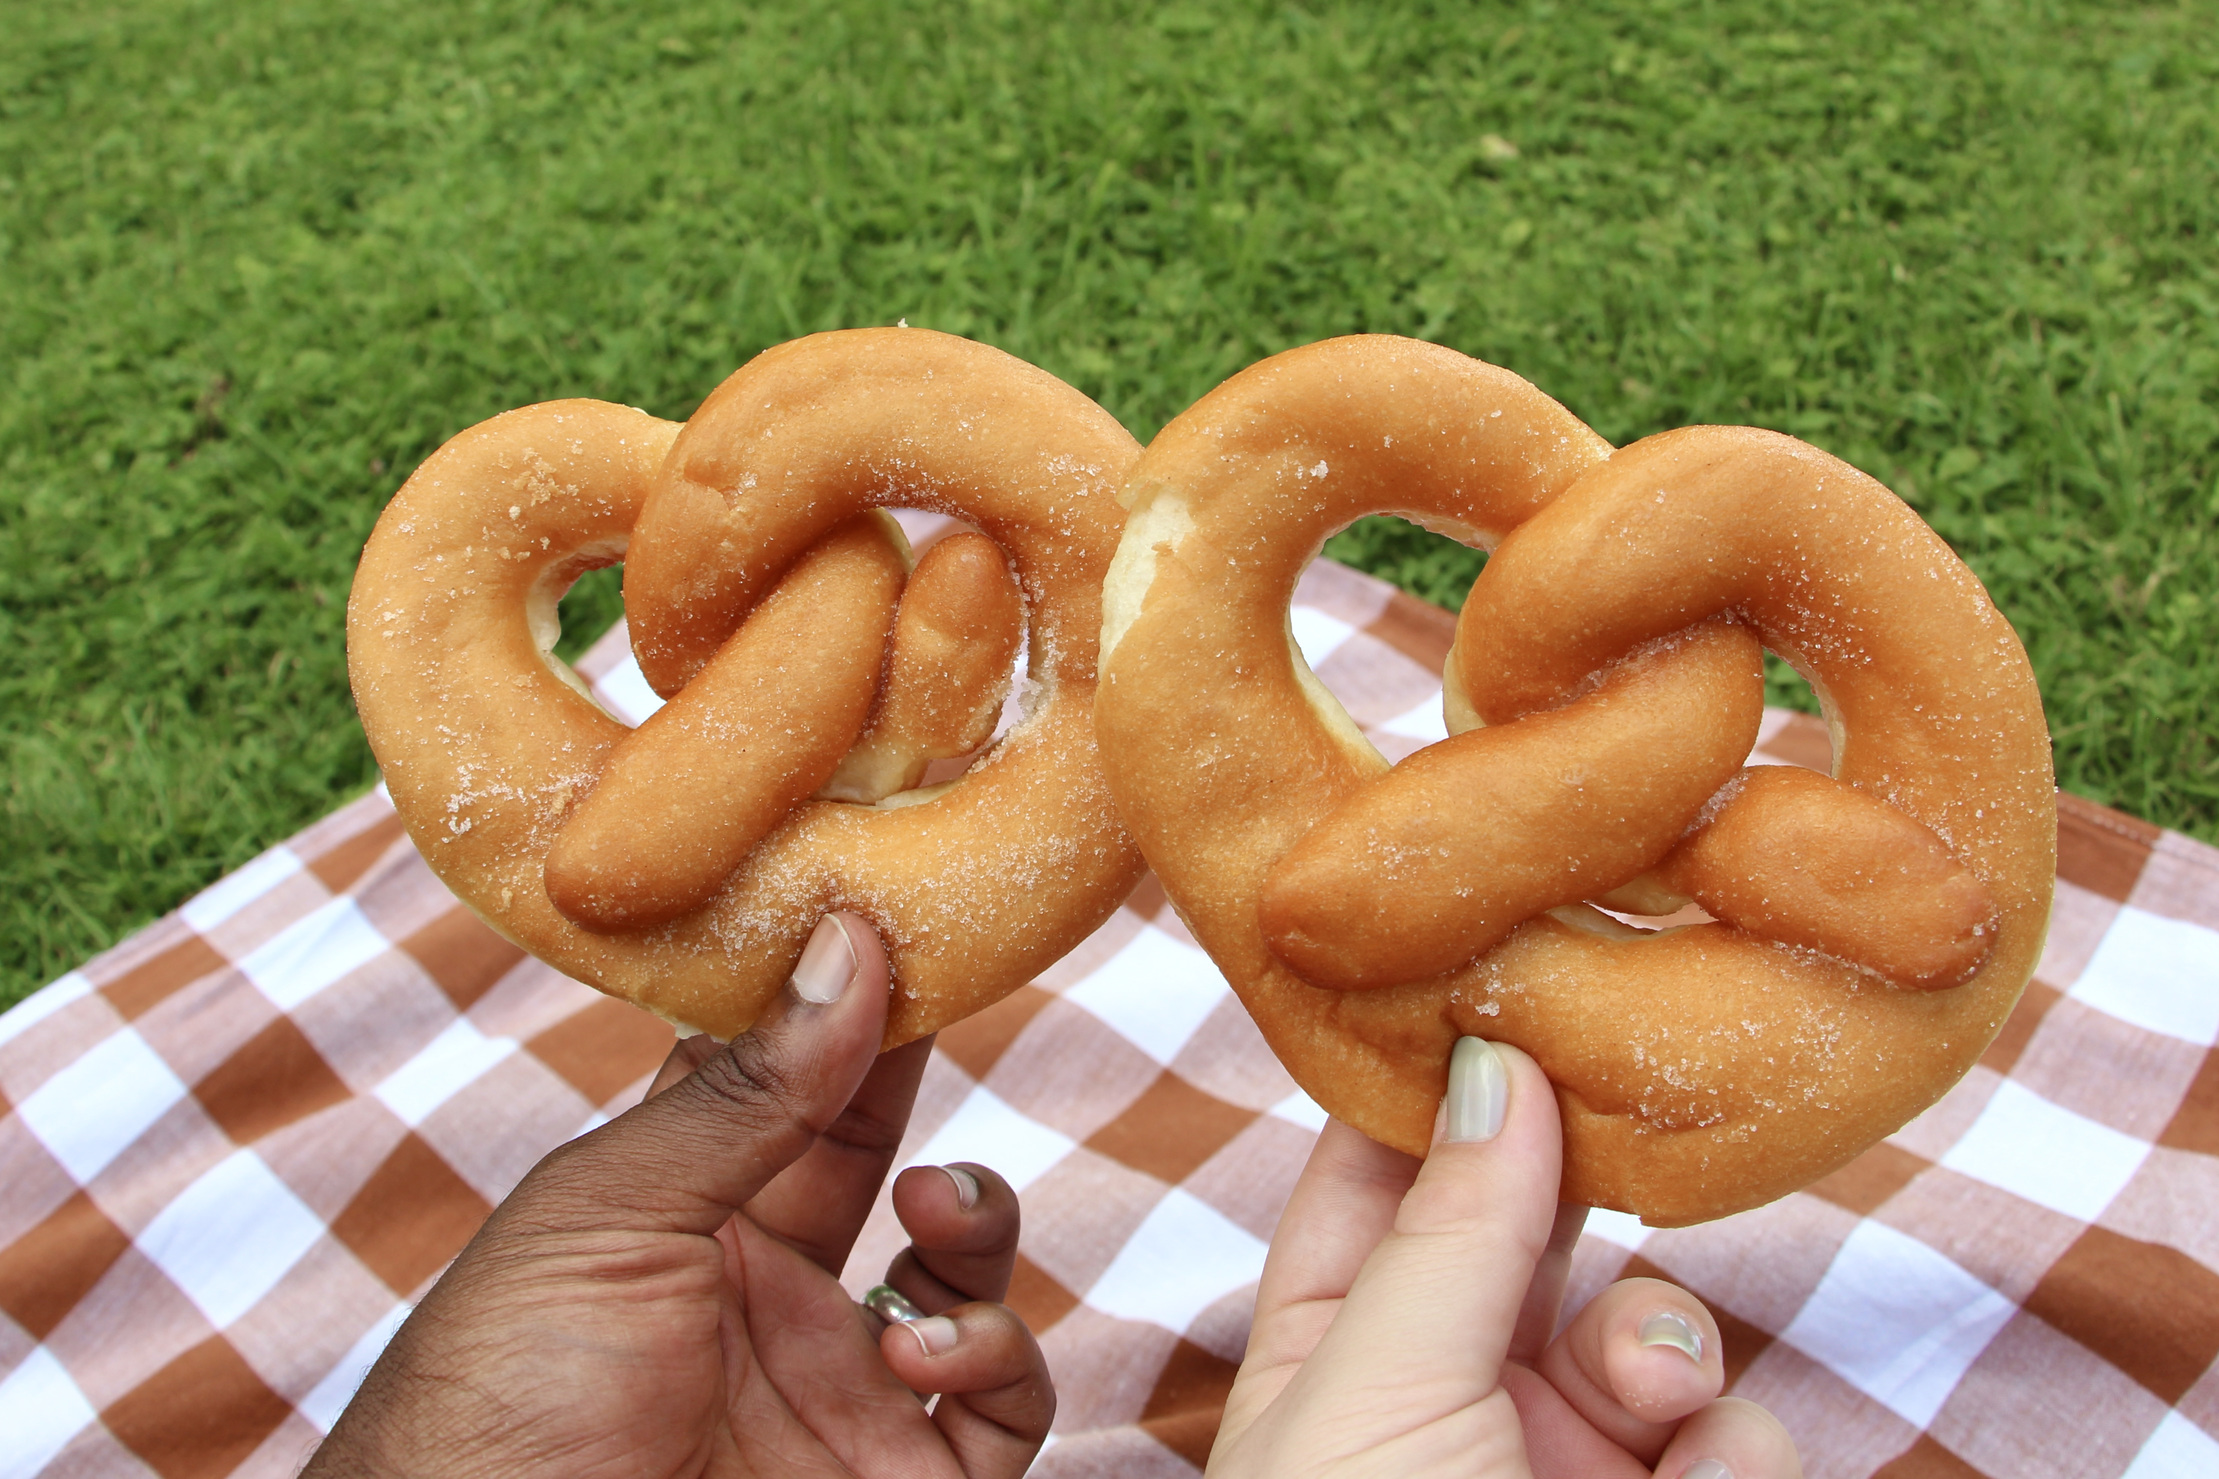 Jalen and Maria hold sugar pretzels over a brown and white checkered picnic blanket.